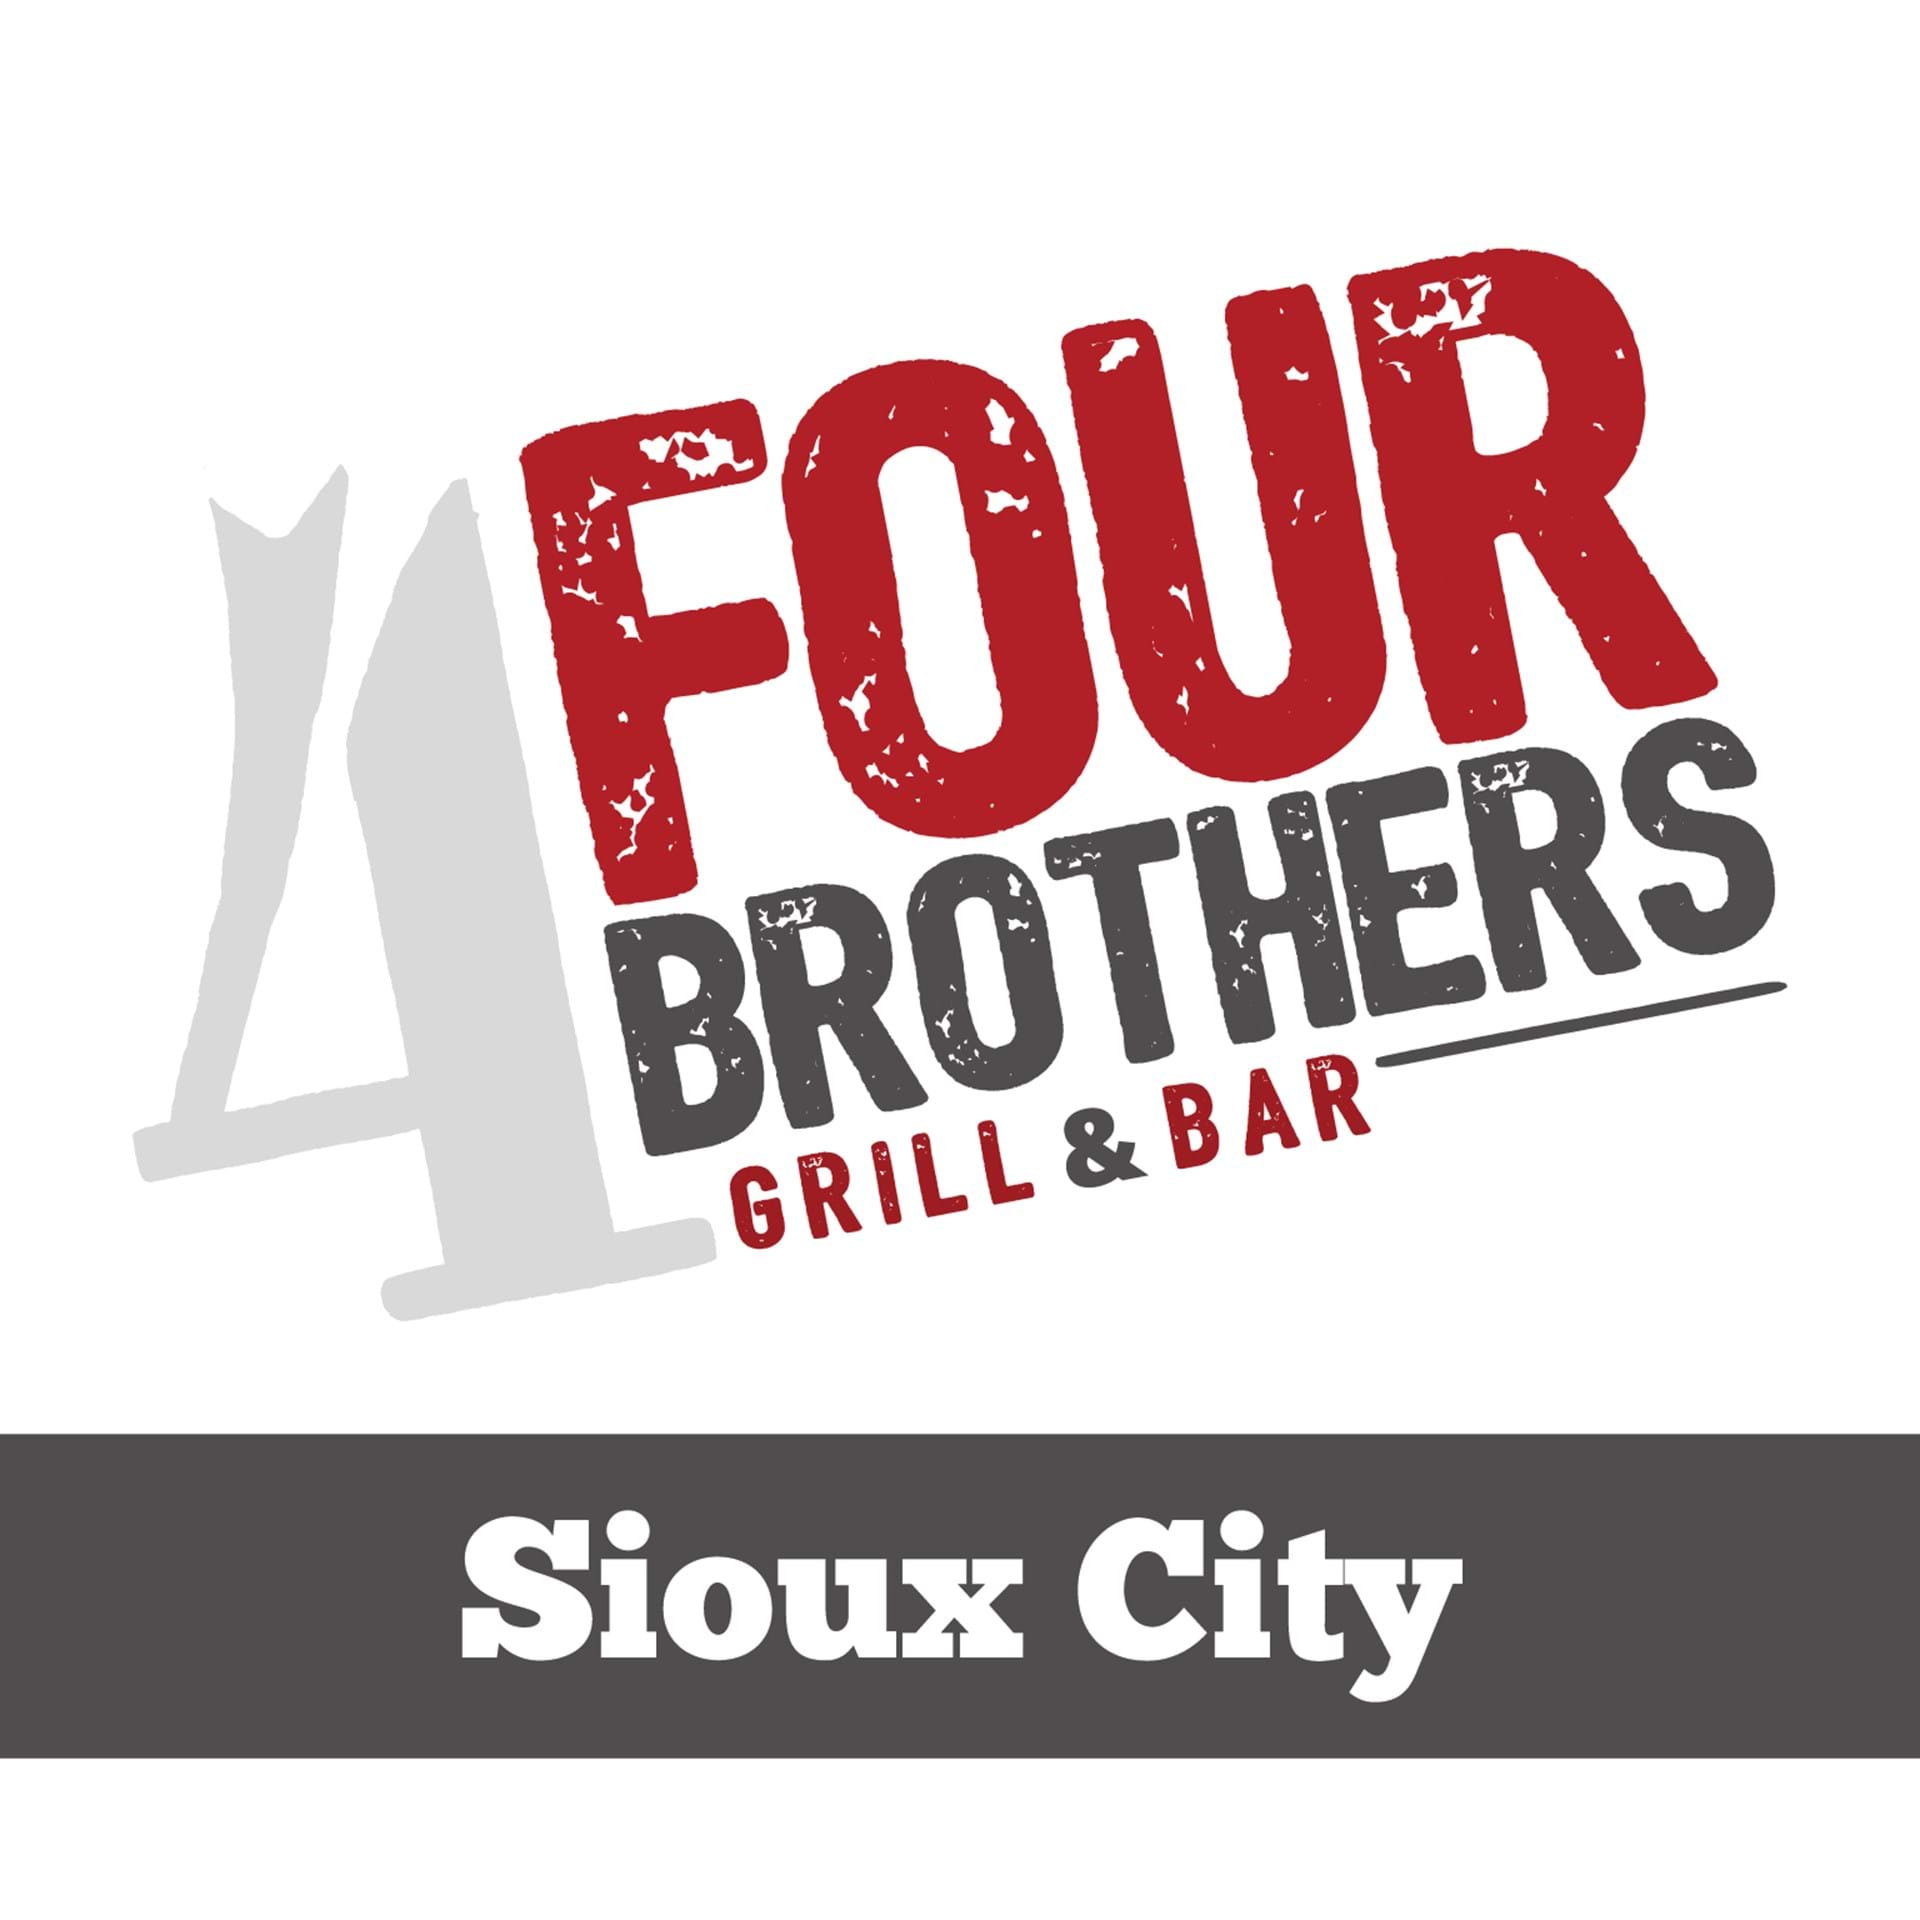 4 Brothers Grill & Bar